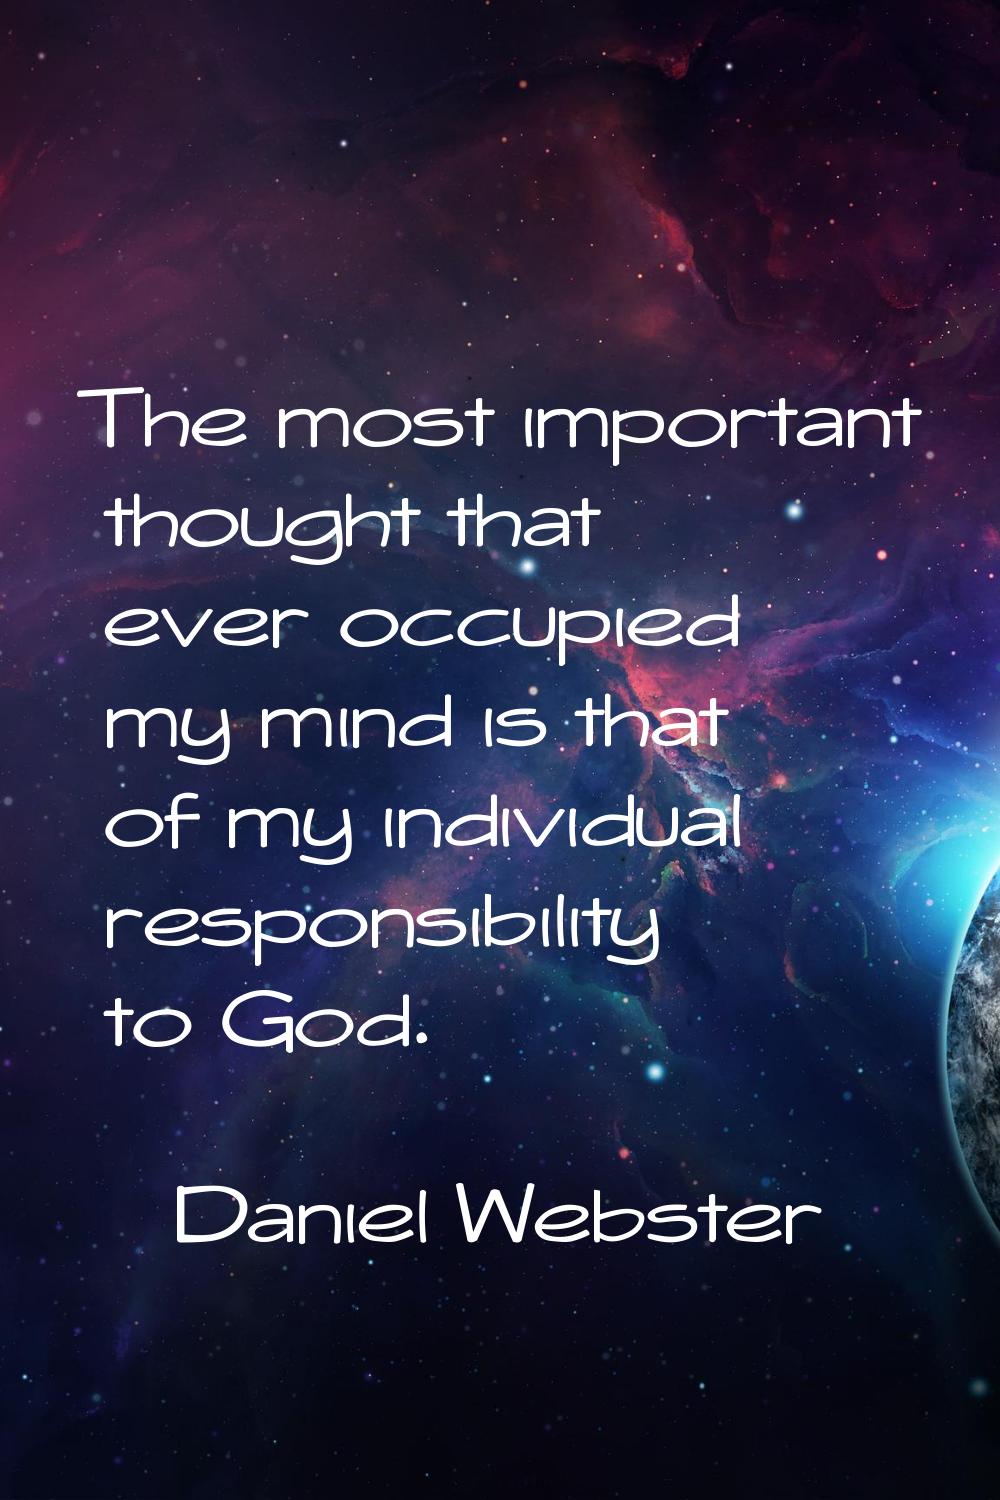 The most important thought that ever occupied my mind is that of my individual responsibility to Go